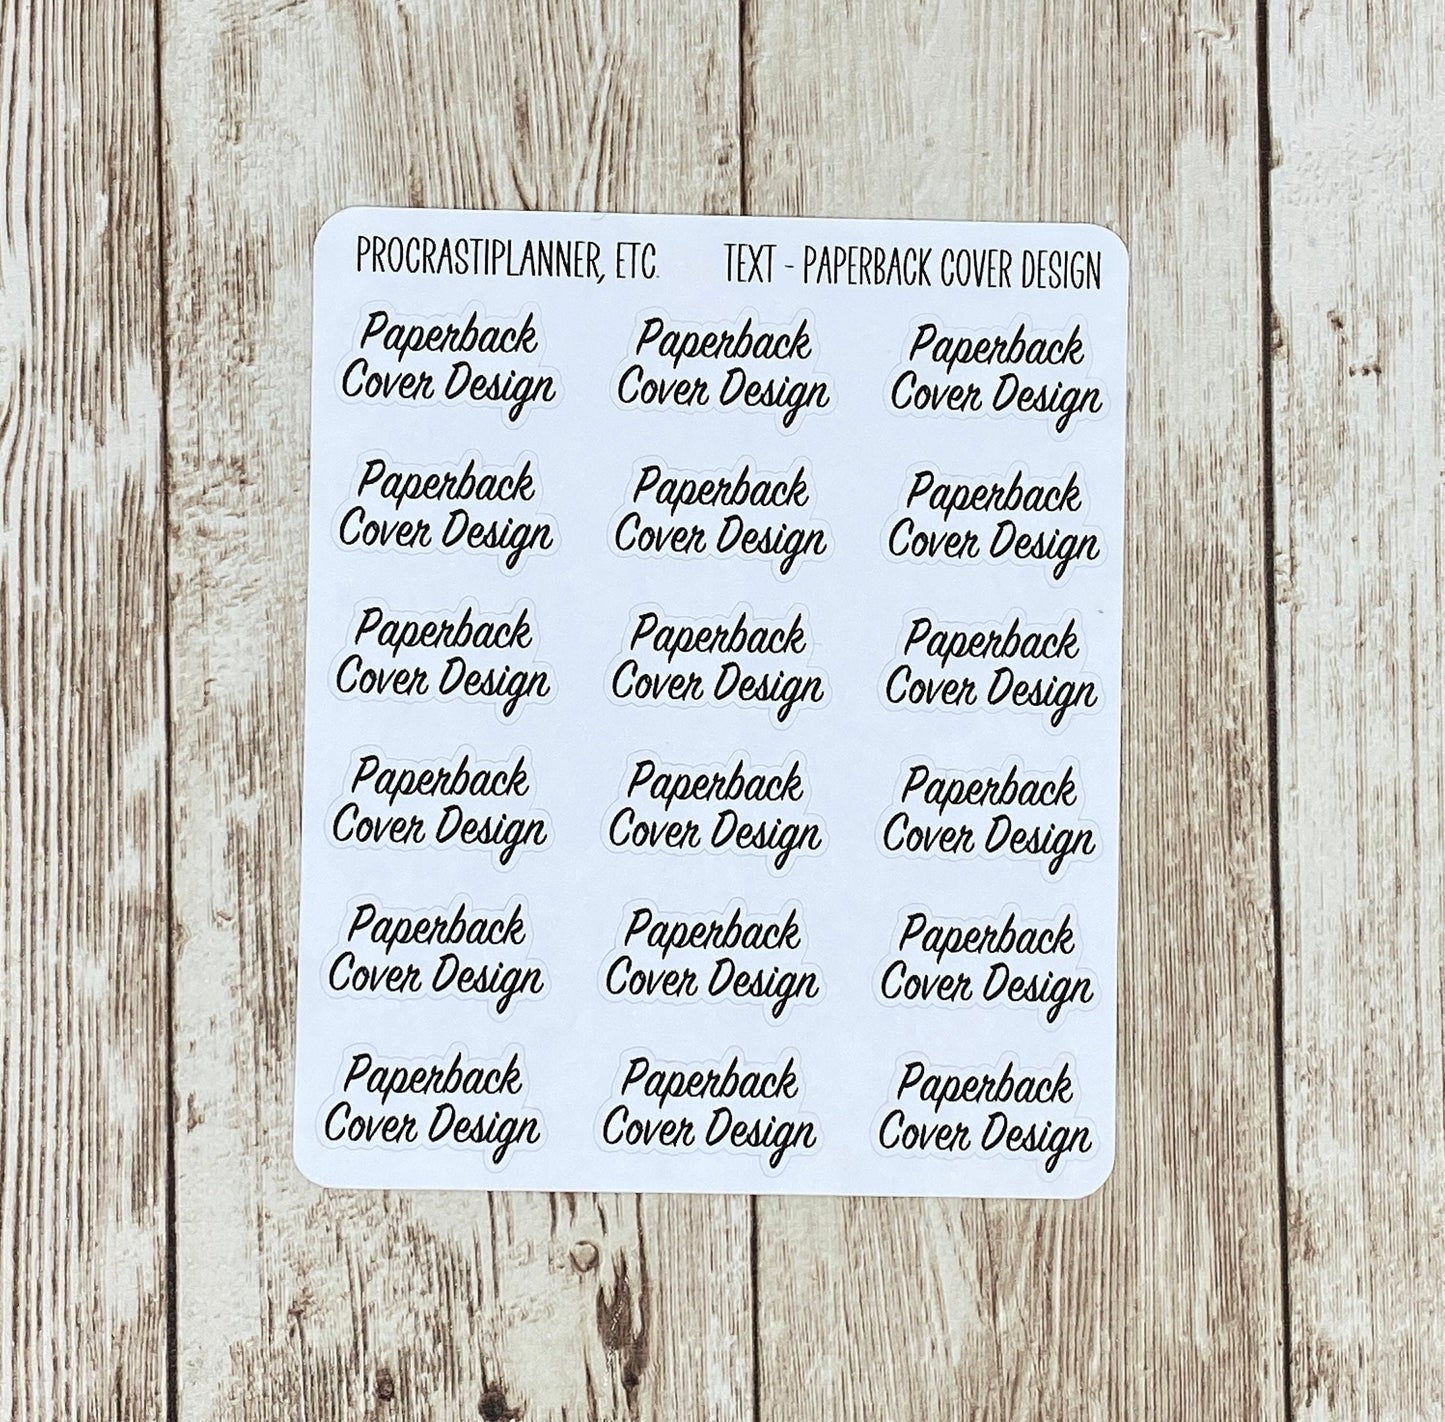 Text - Paperback Cover Design Planner Stickers in White Matte and Clear Matte Paper for Journals, Planners or Agendas